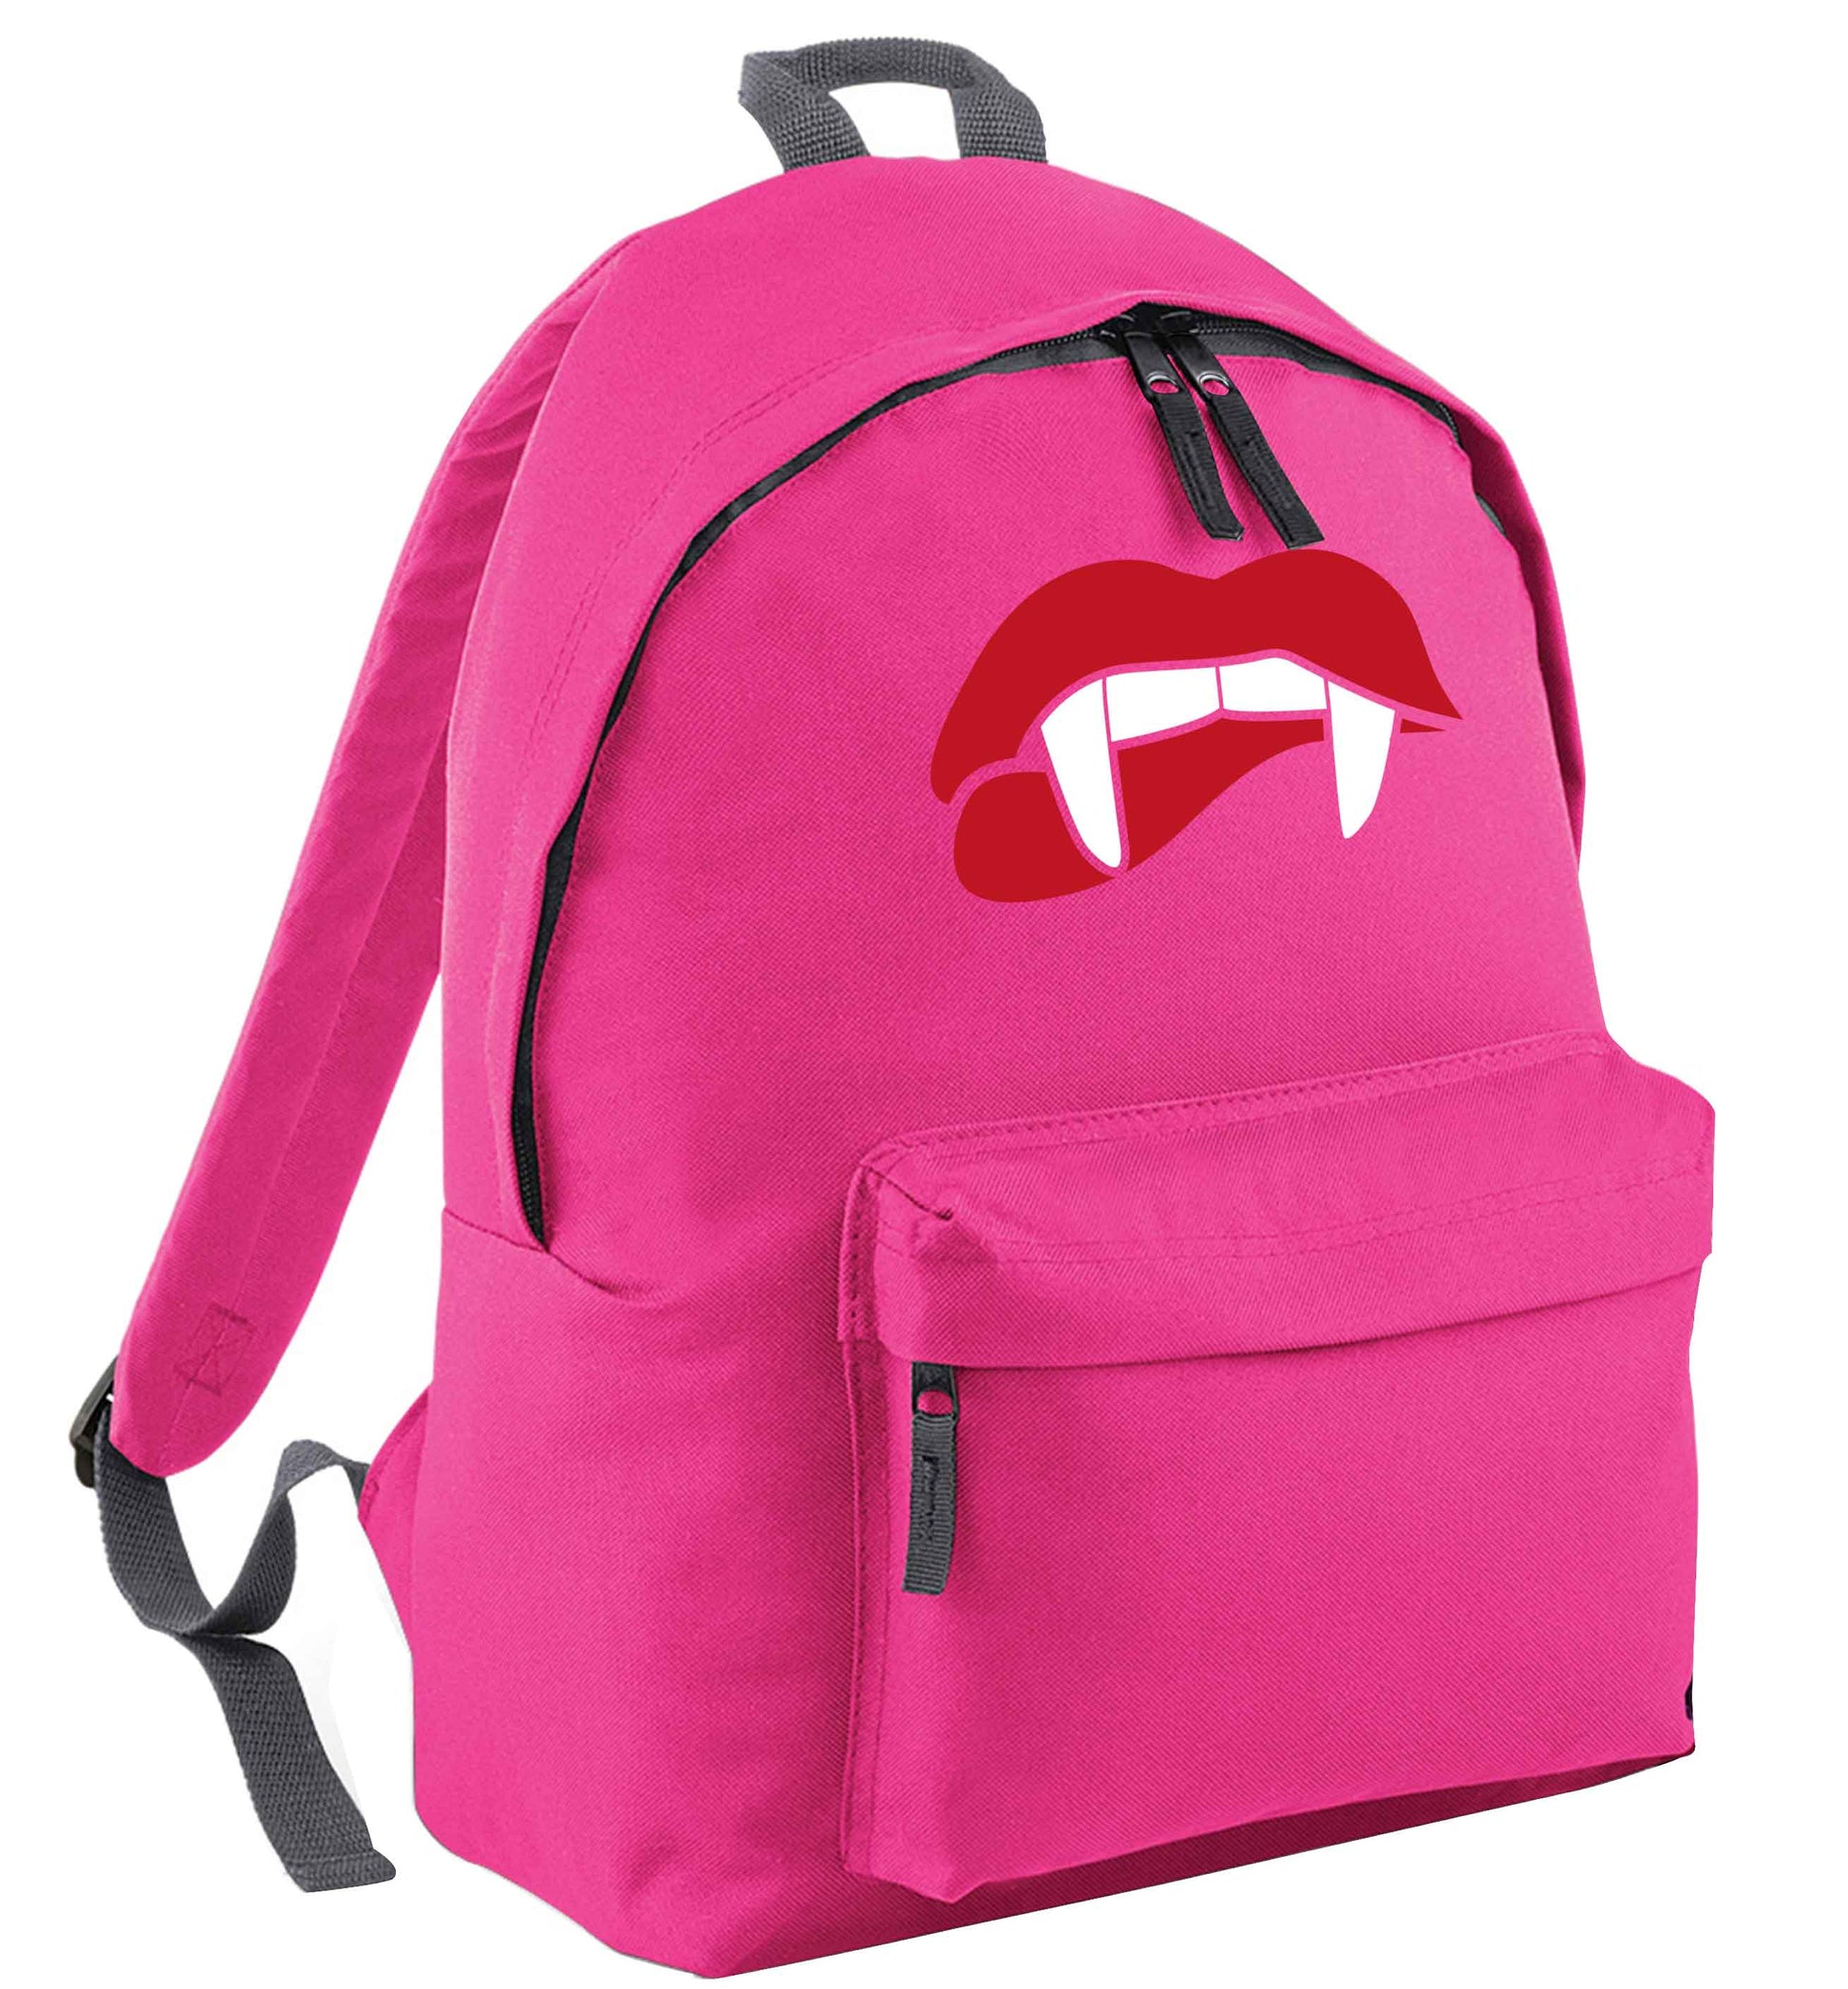 Vampire fangs pink adults backpack